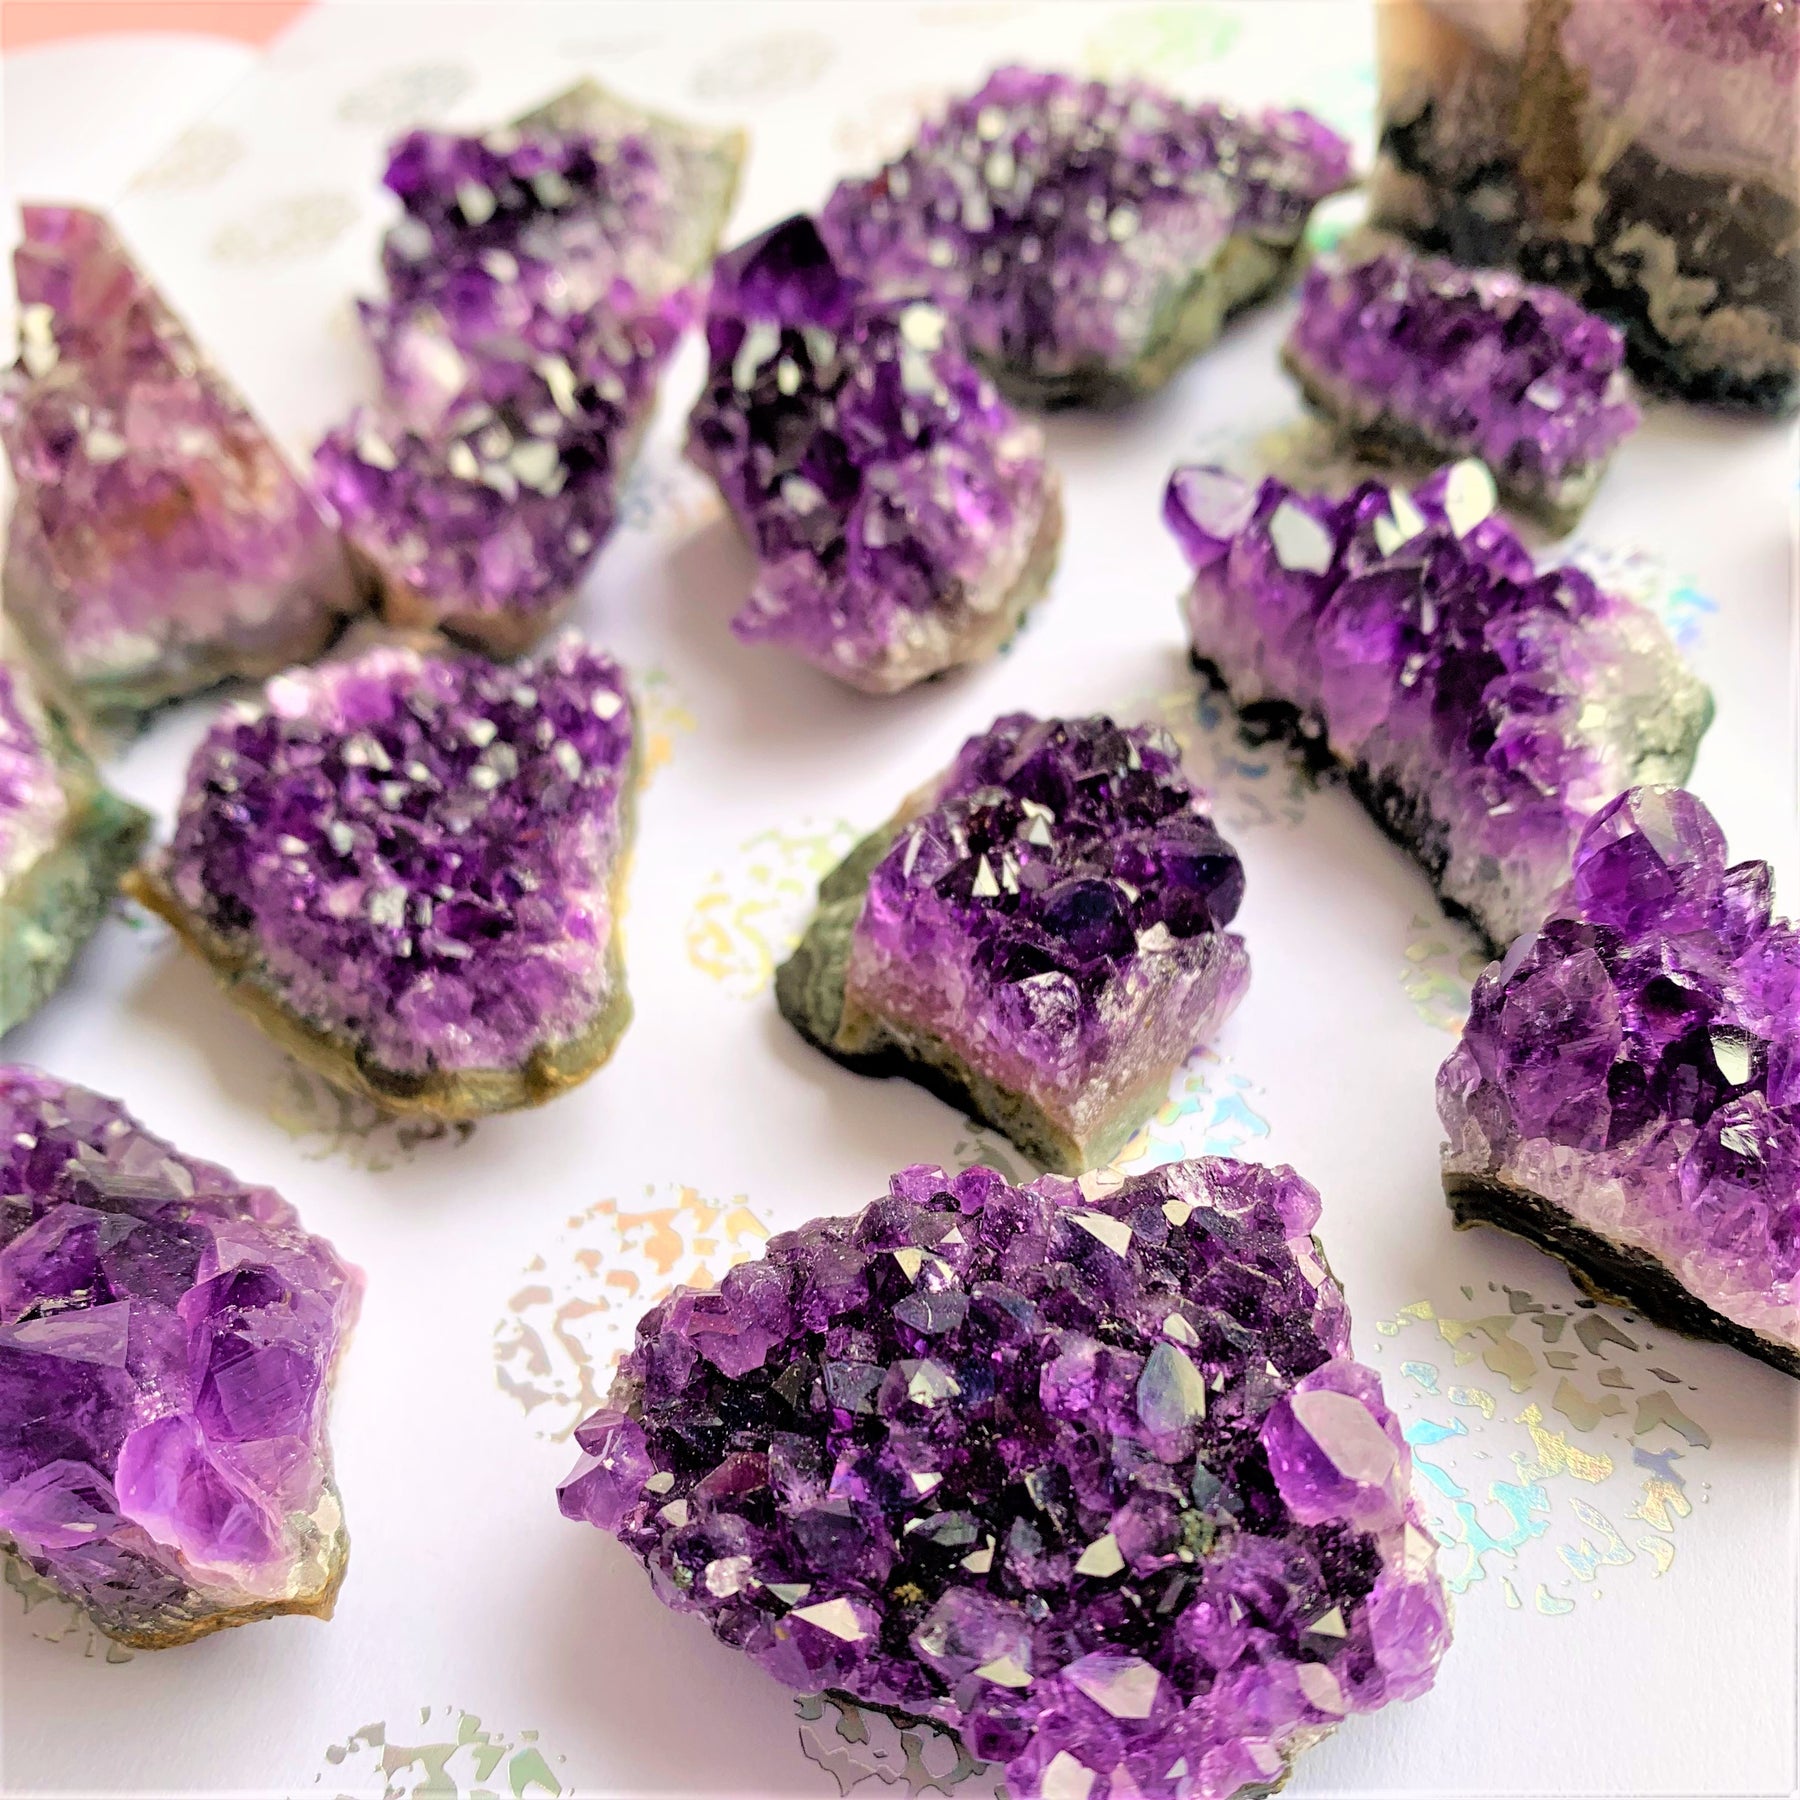 Deciding Which Type of Crystal To Use?